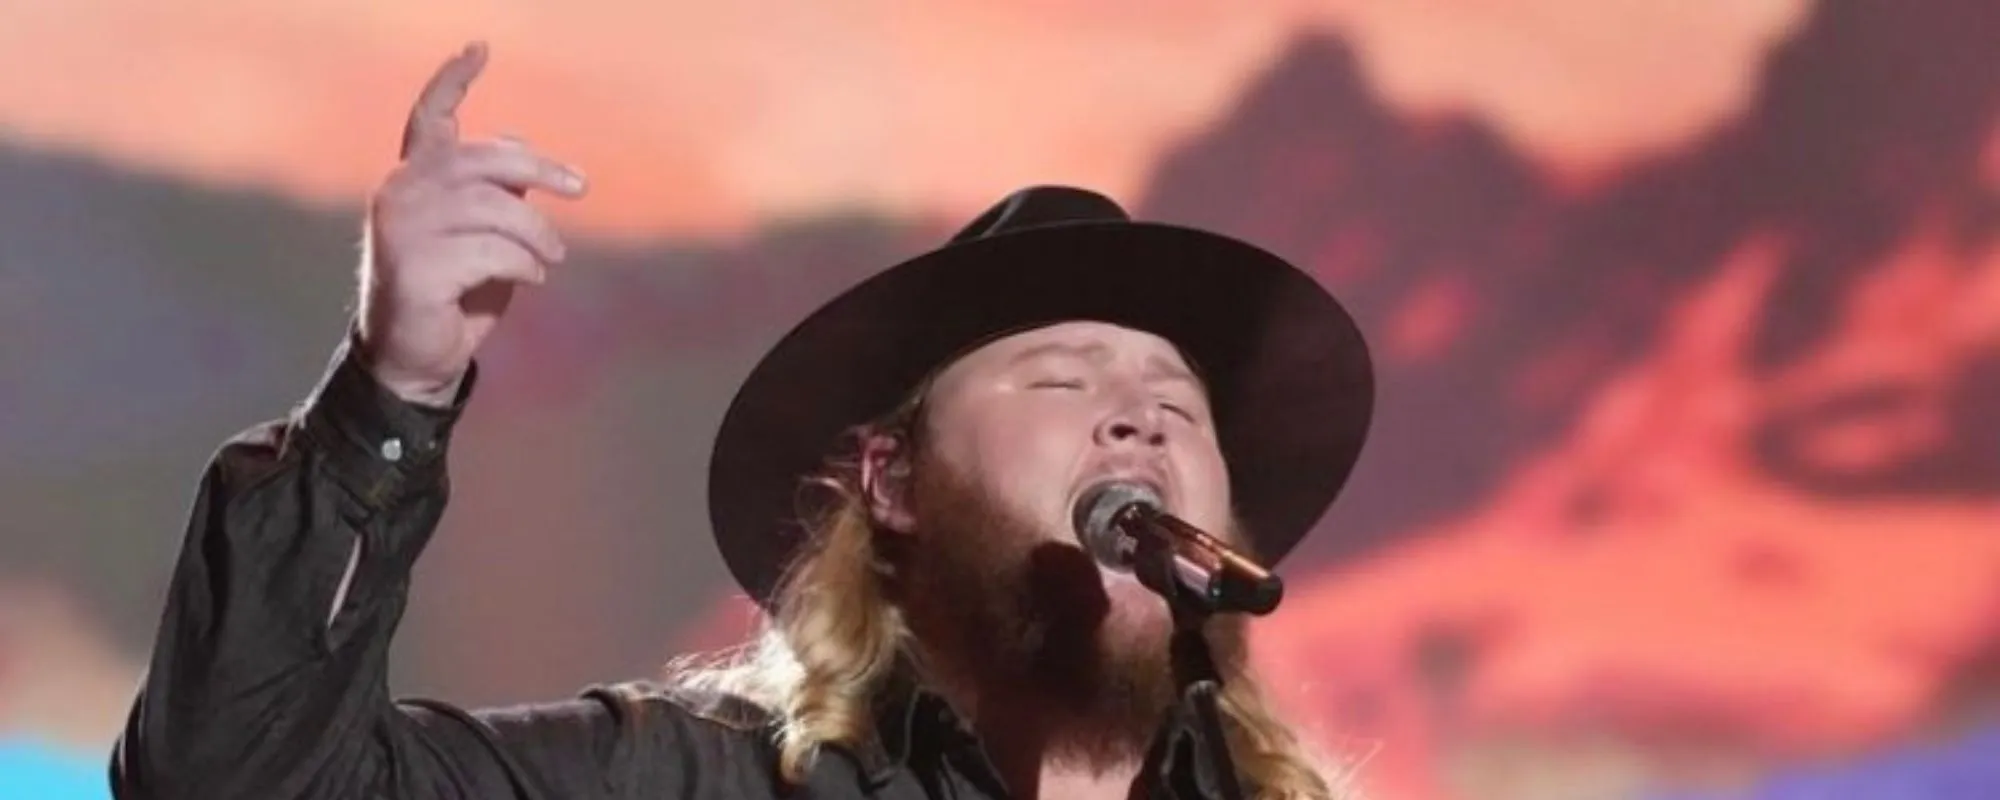 ‘American Idol’ Contestant Makes Top 7 With Foot-Stomping Johnny Cash Performance